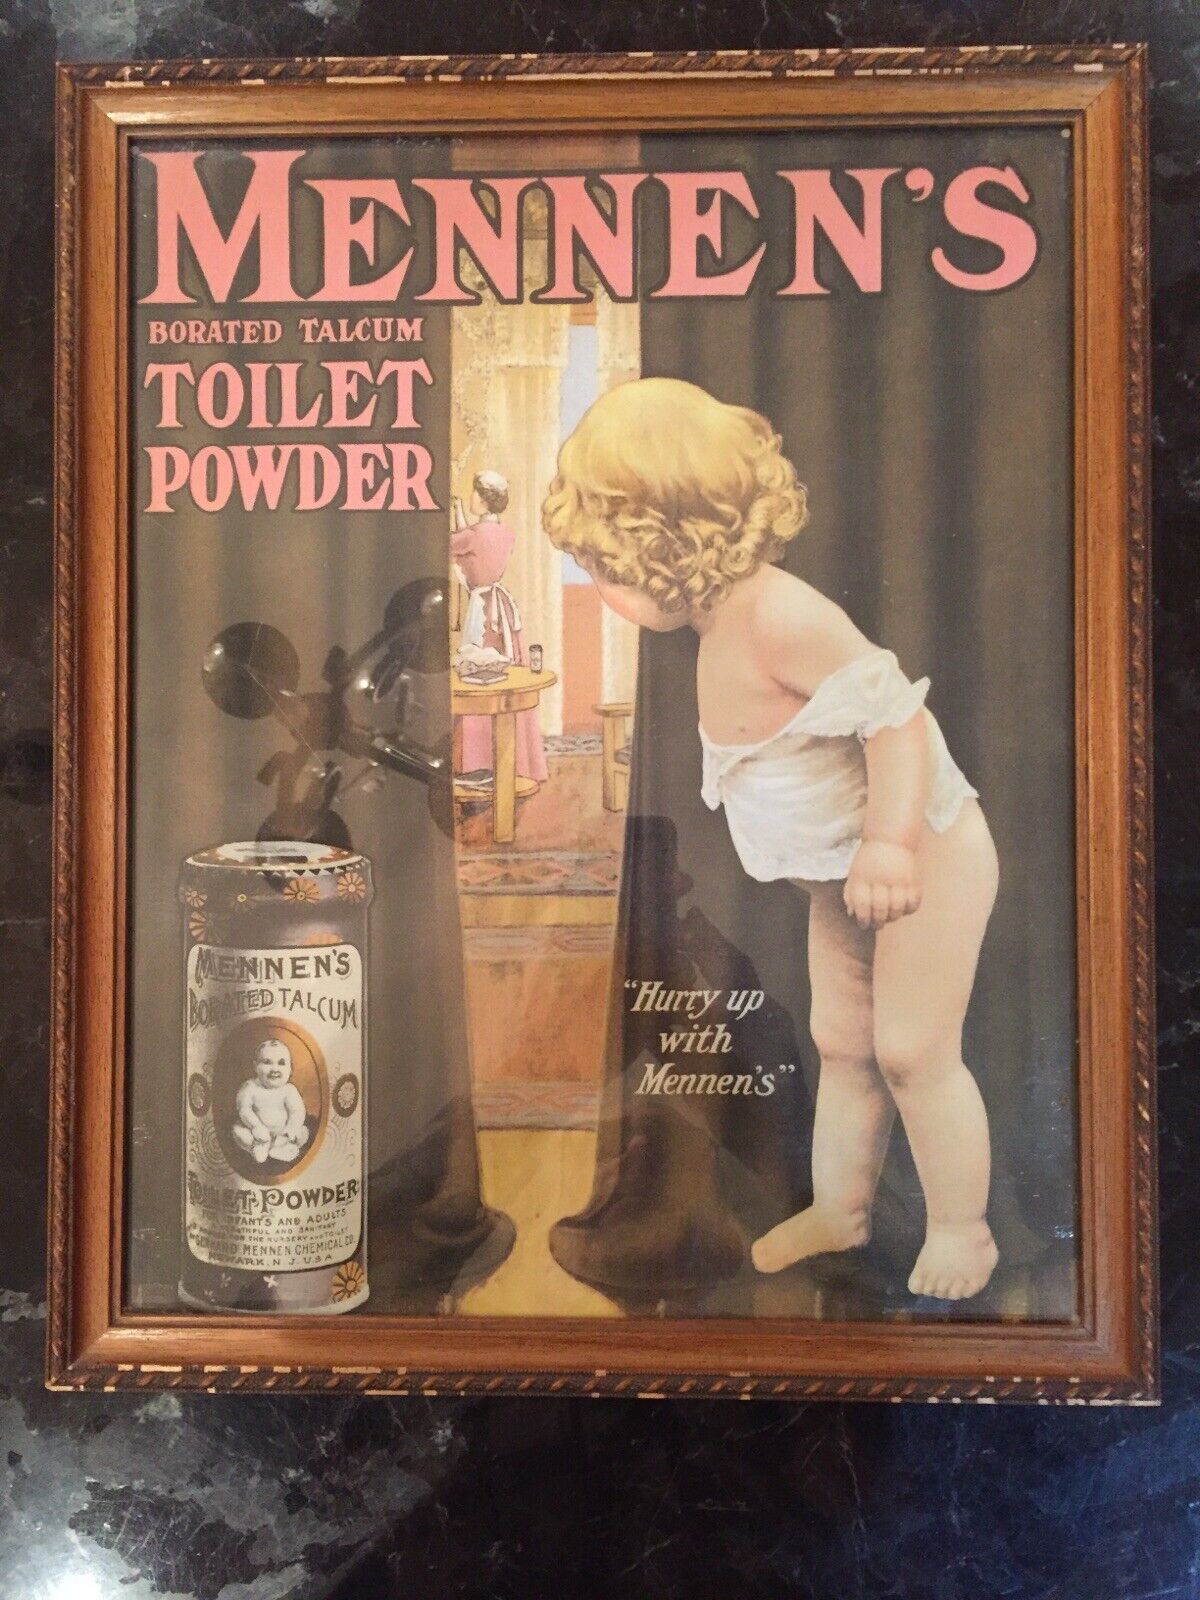 MENNEN’S BORATED TOILET POWDER FRAMED ADVERTISING 15 X 18 INCHES